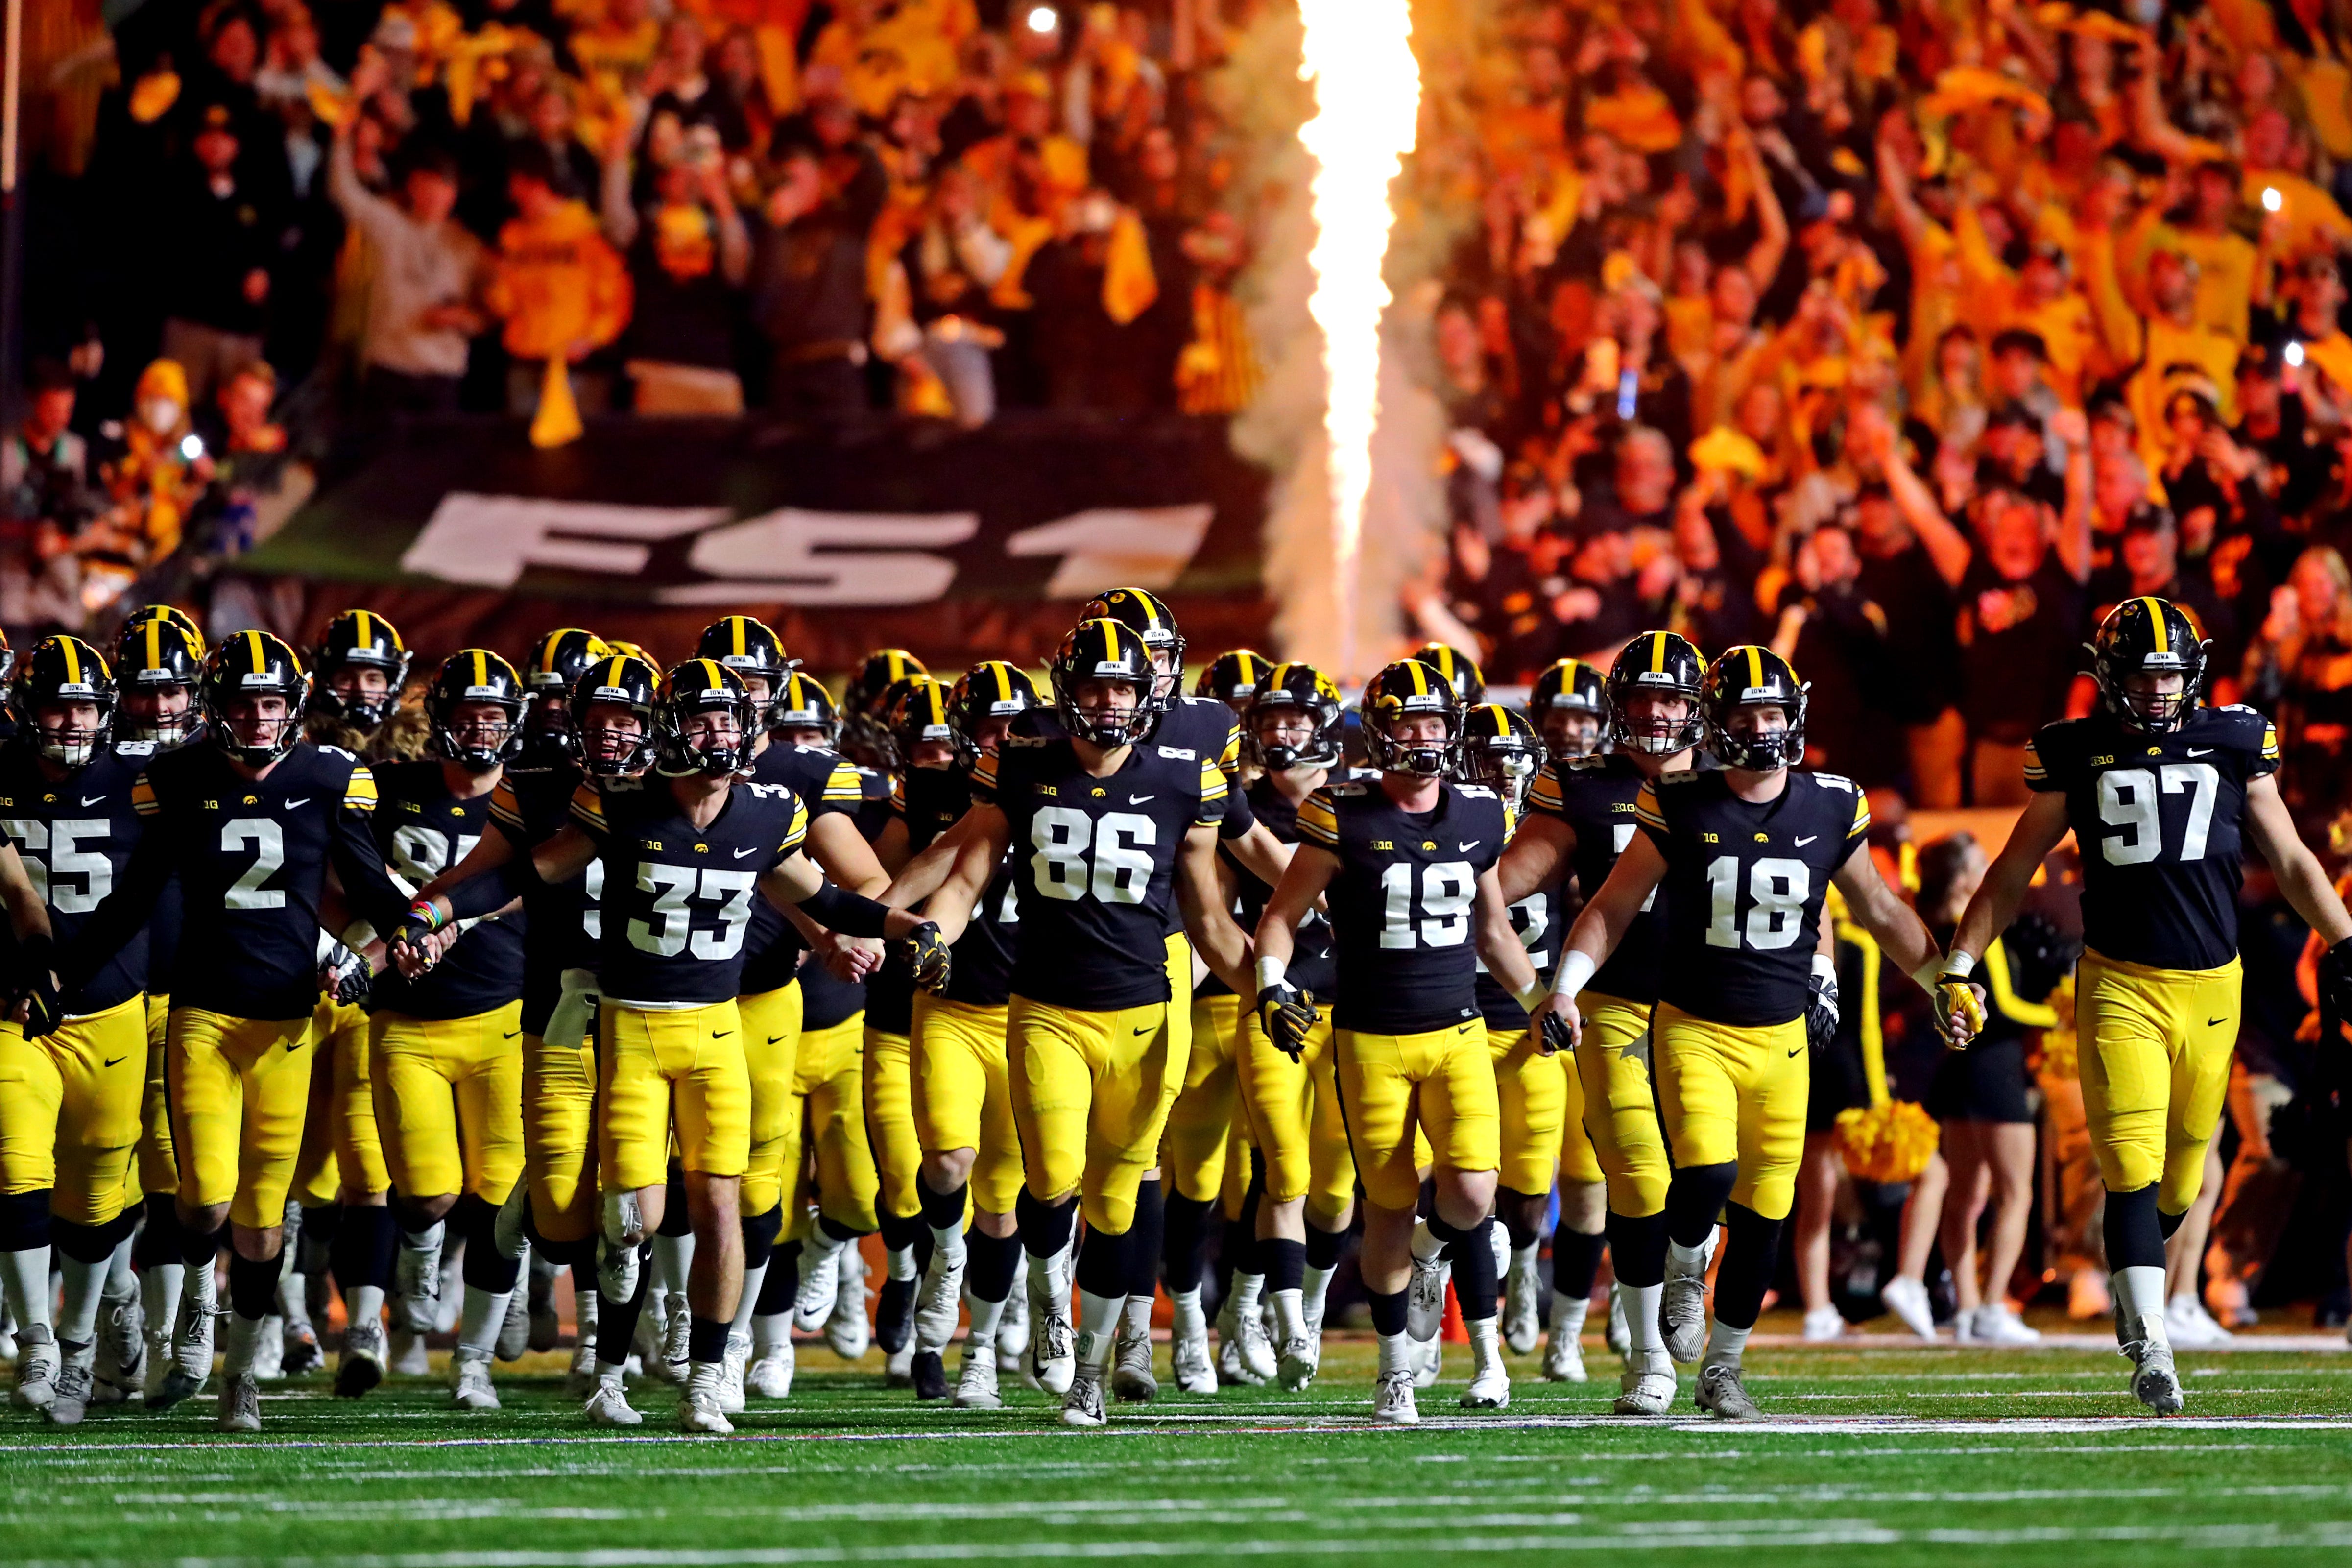 Iowa Hawkeyes players hold hands as the run onto the field before playing the Michigan Wolverines in the Big Ten Conference championship game, Saturday, Dec. 4, 2021, at Lucas Oil Stadium in Indianapolis, Ind.